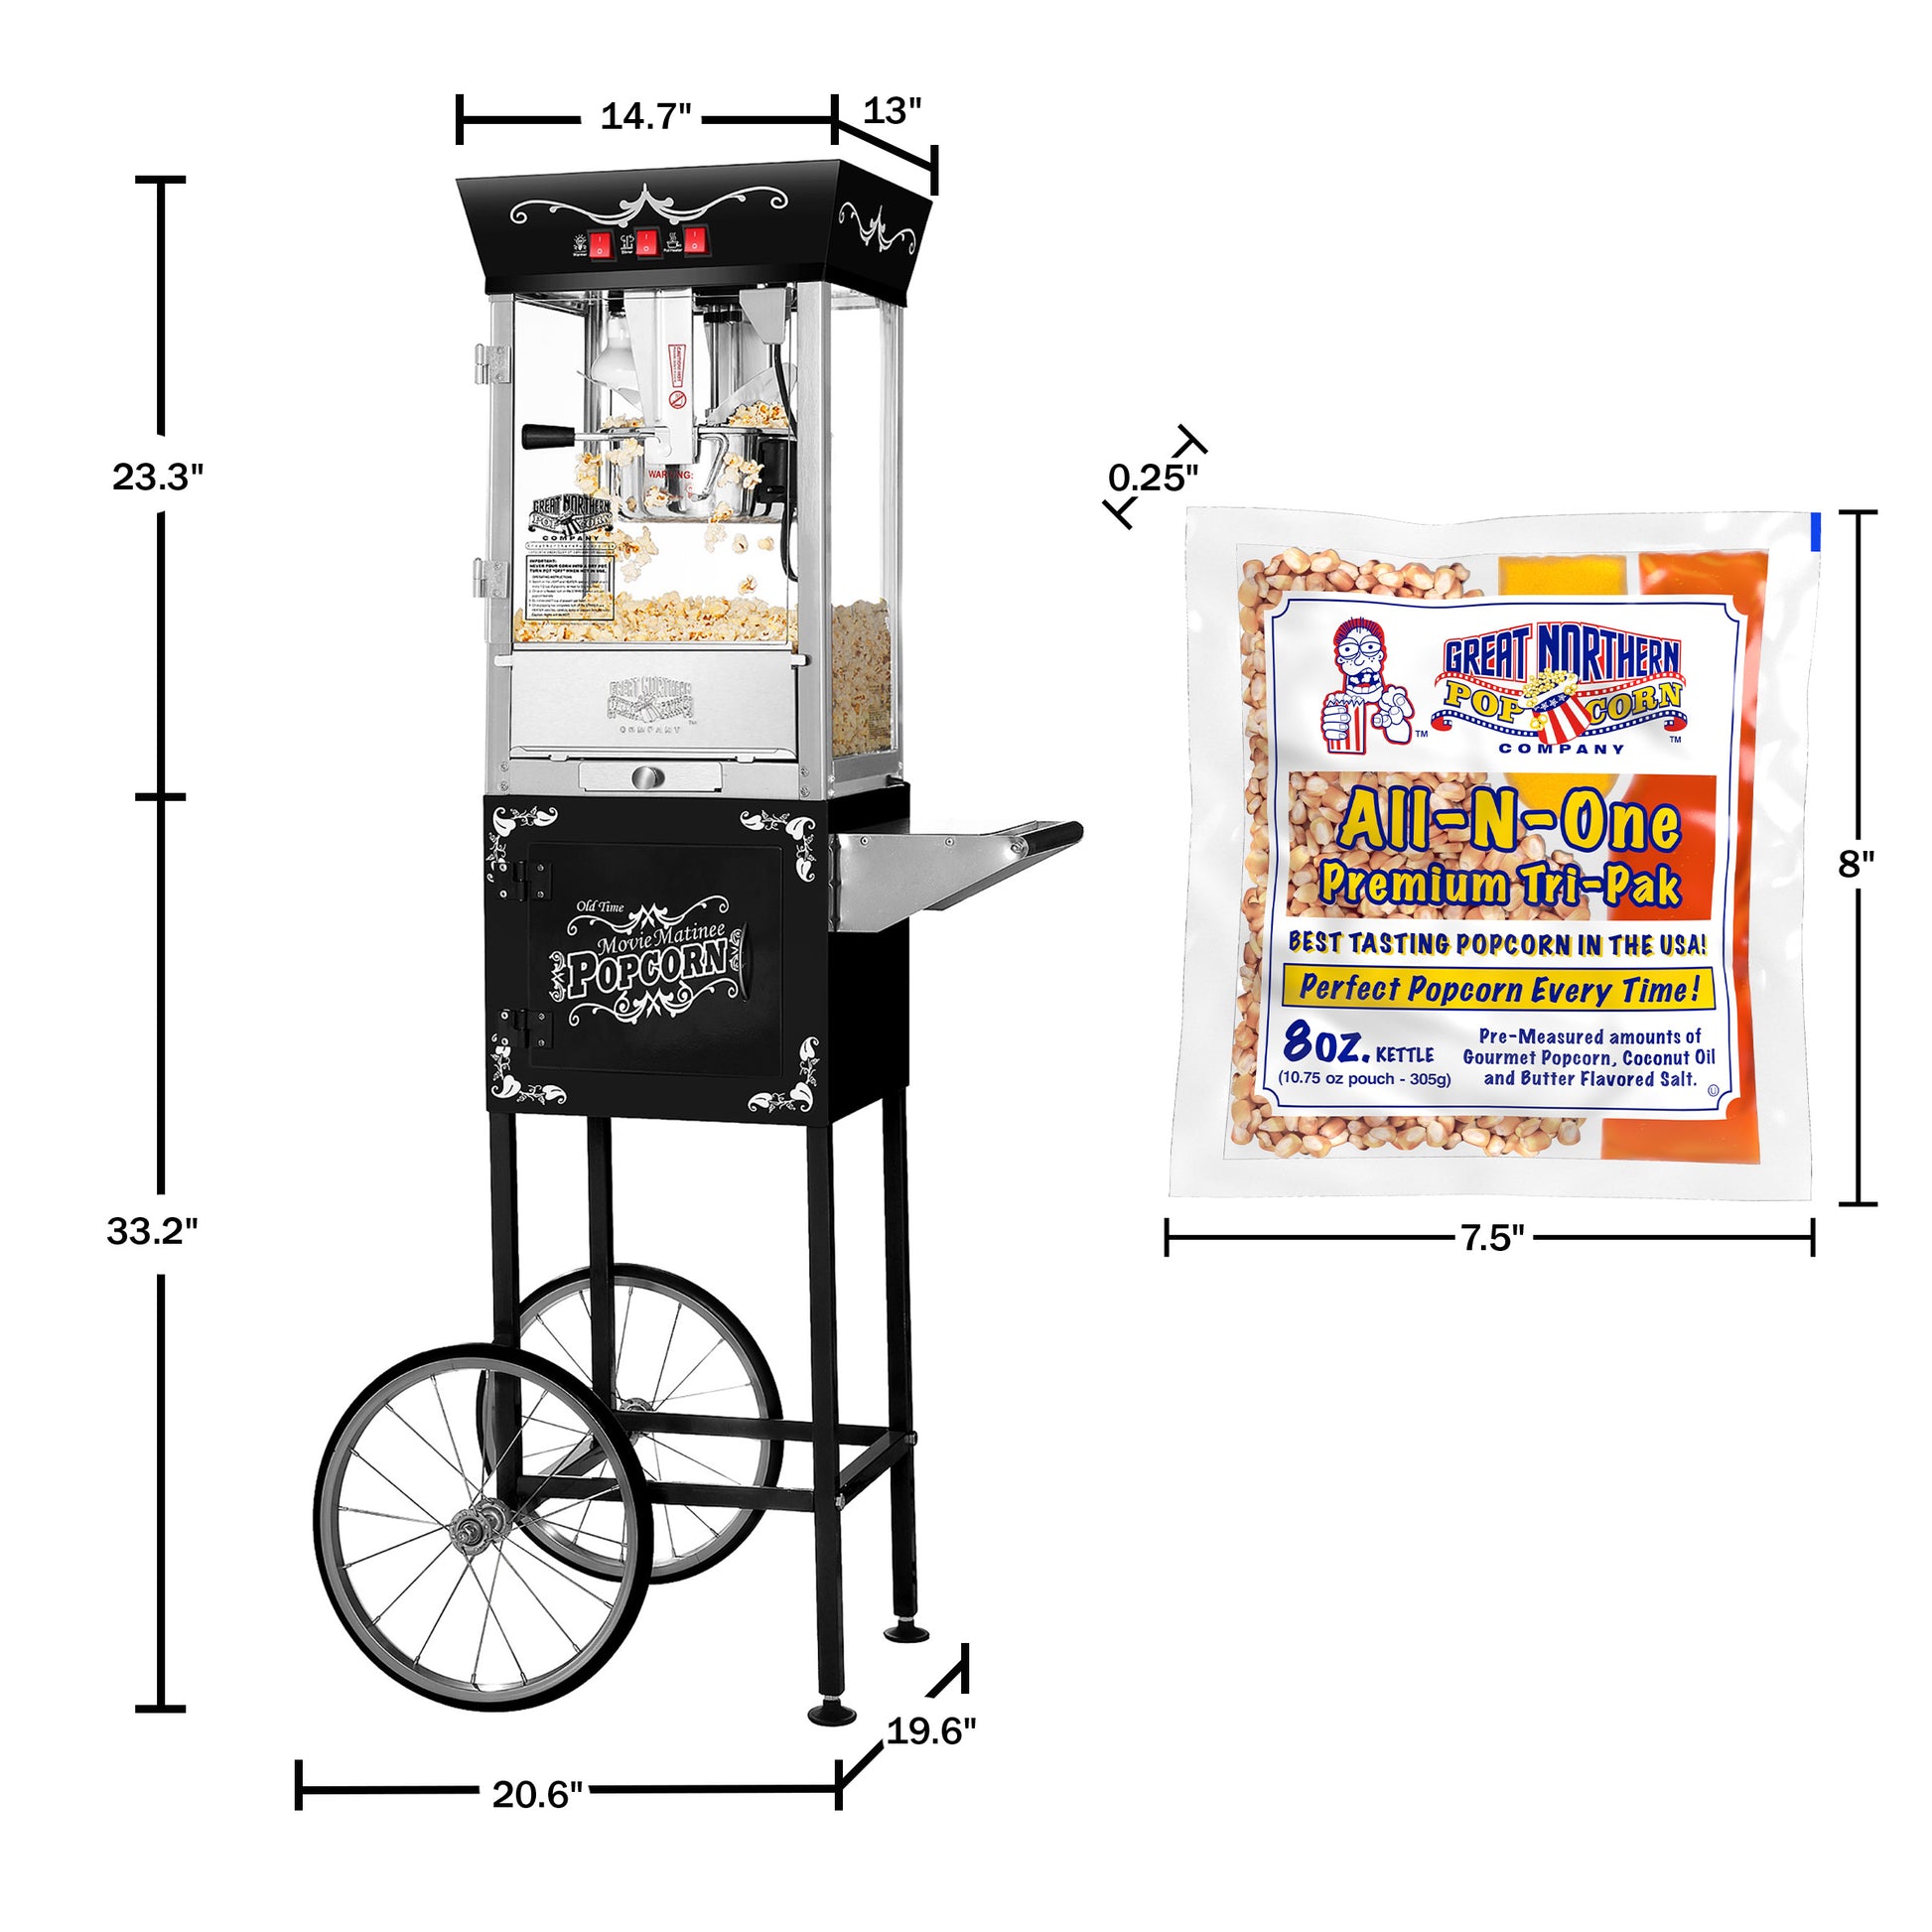 Popcorn machines are back at Tuesday Morning this week